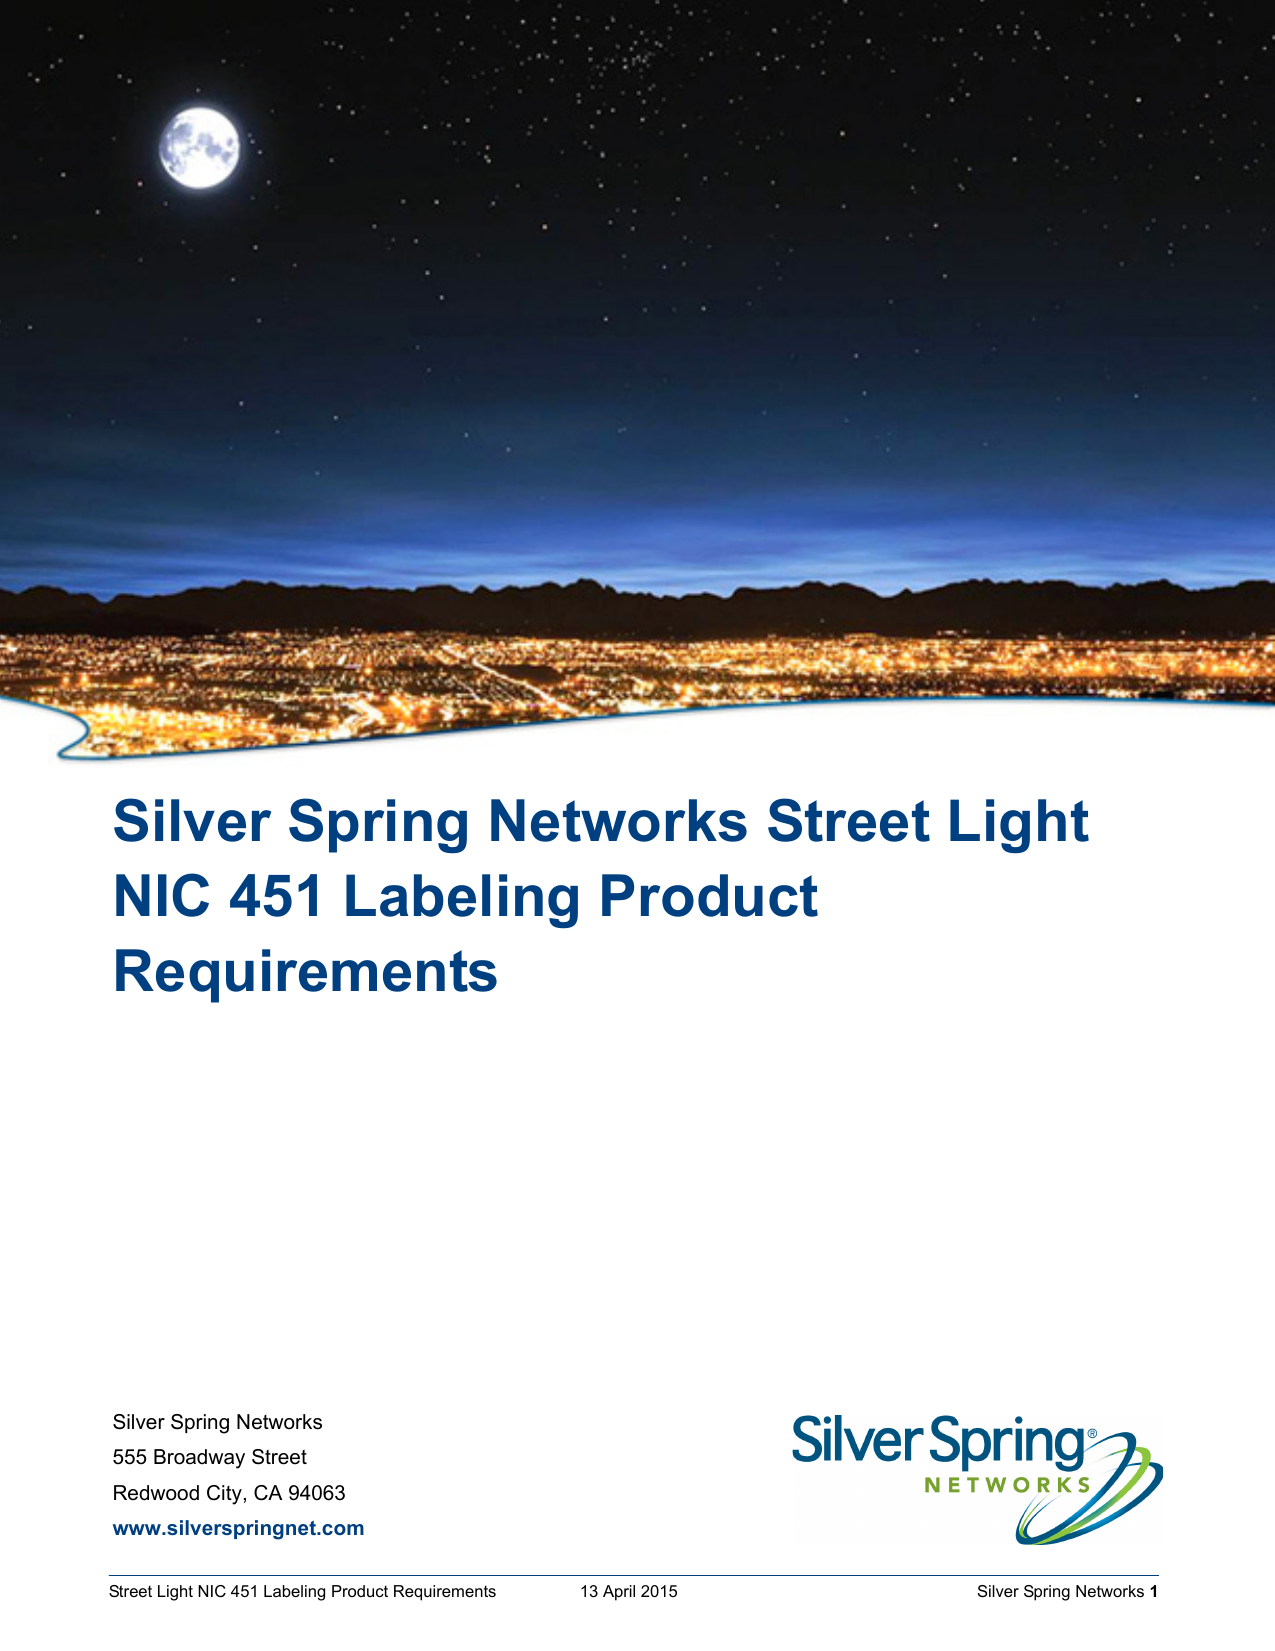 Street Light NIC 451 Labeling Product Requirements  13 April 2015    Silver Spring Networks 1Silver Spring Networks555 Broadway StreetRedwood City, CA 94063www.silverspringnet.comSilver Spring Networks Street Light NIC 451 Labeling Product Requirements